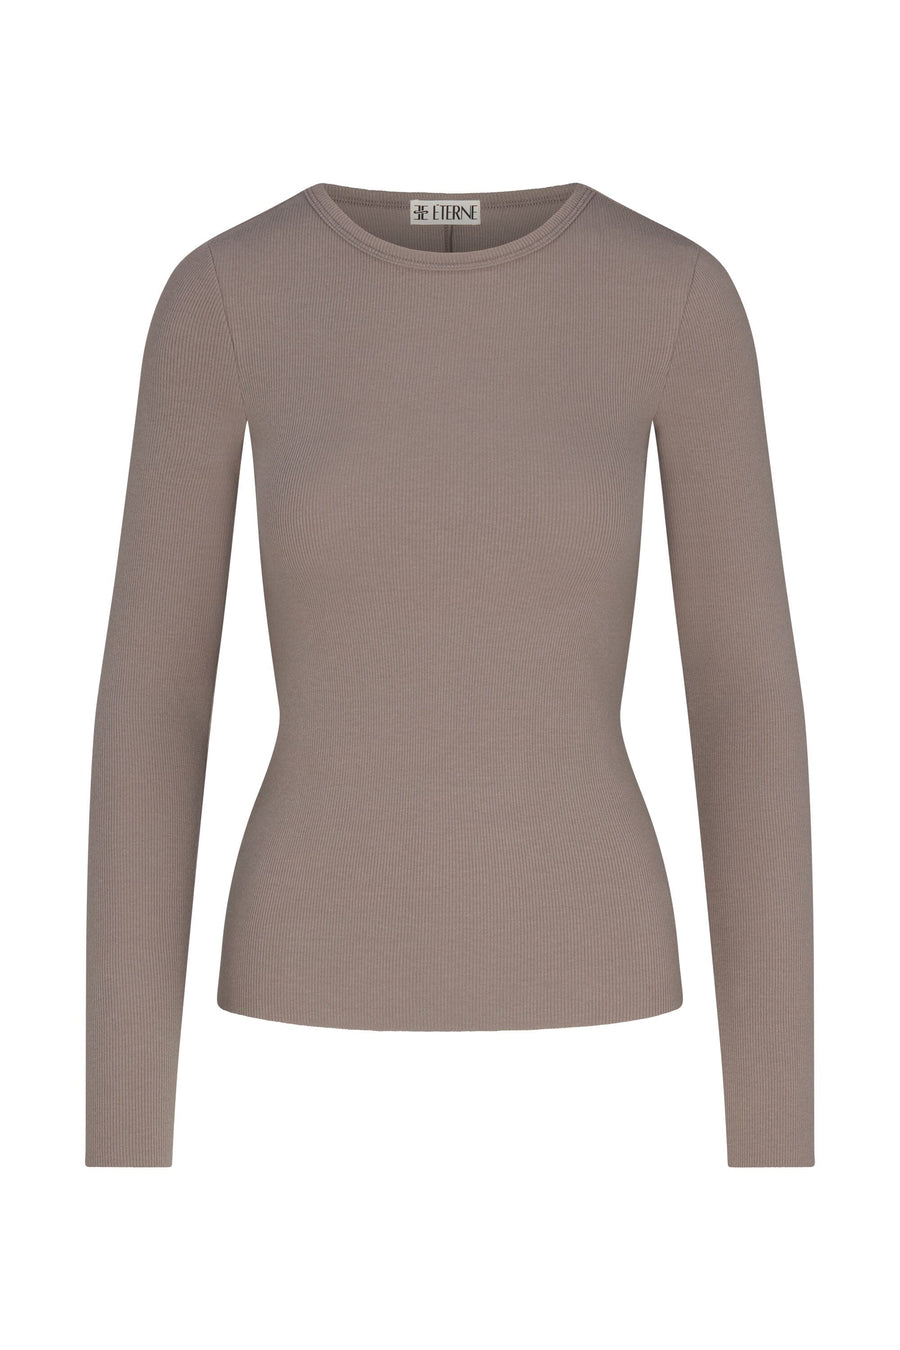 Long Sleeve Fitted Top Clay TOPS ÉTERNE 